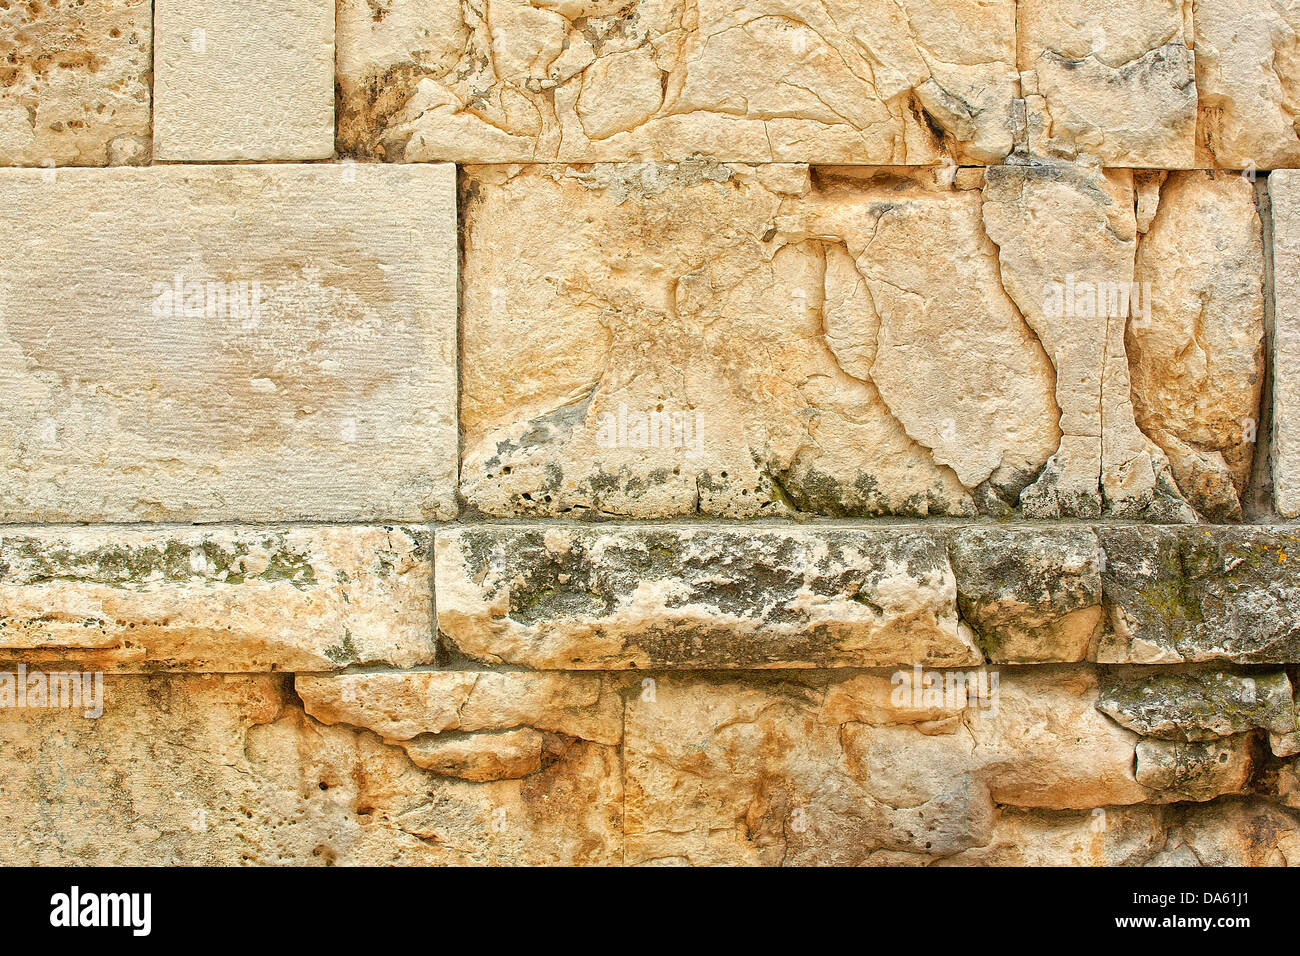 Details Roman building wall Stock Photo